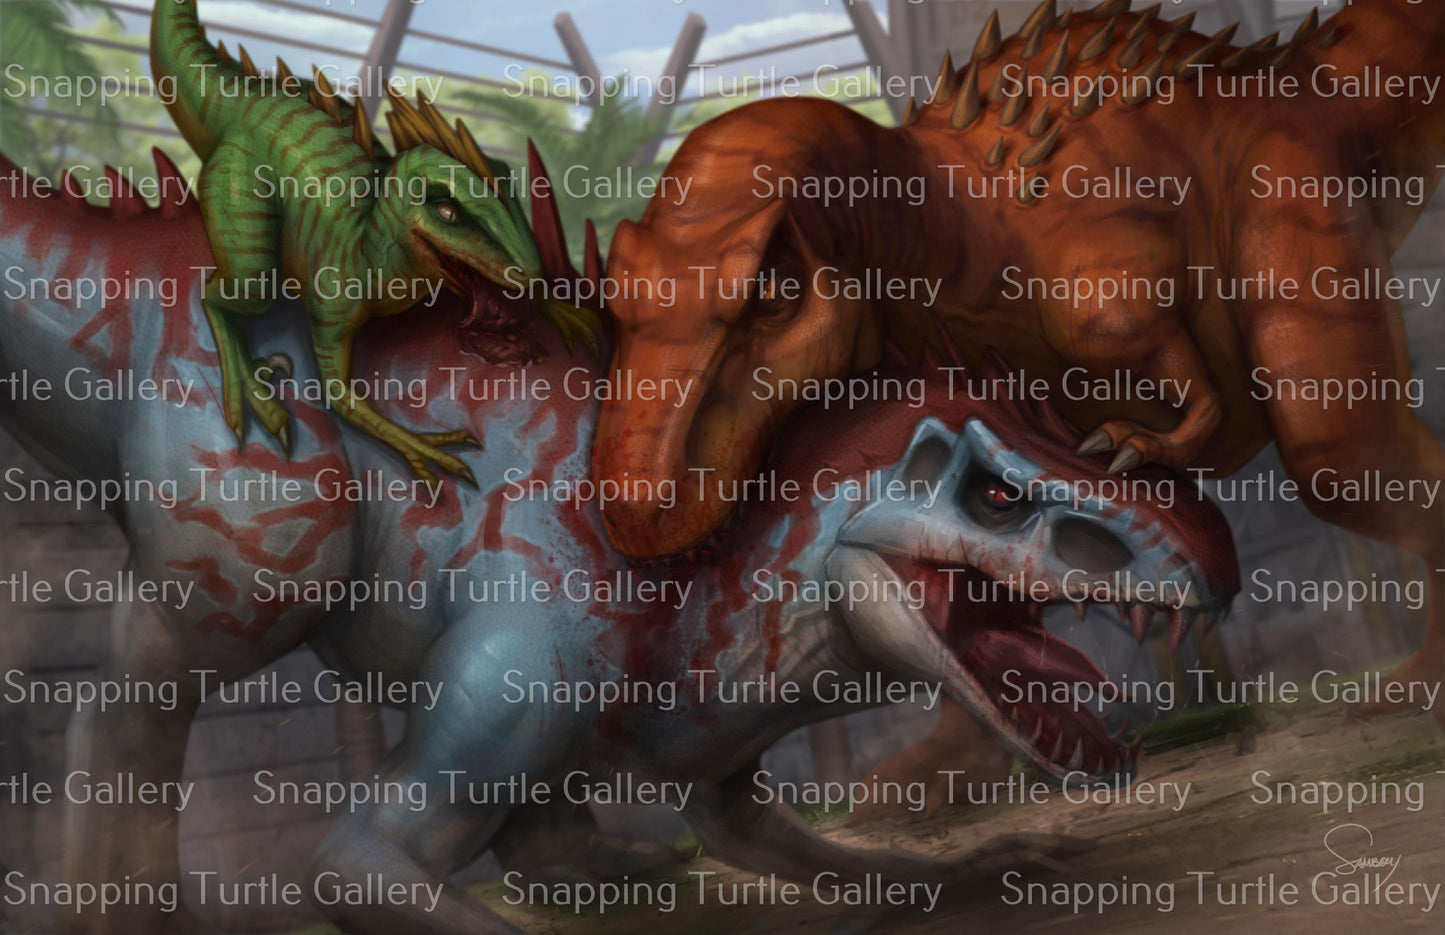 Jurassic Park T-Rex - Snapping Turtle Gallery